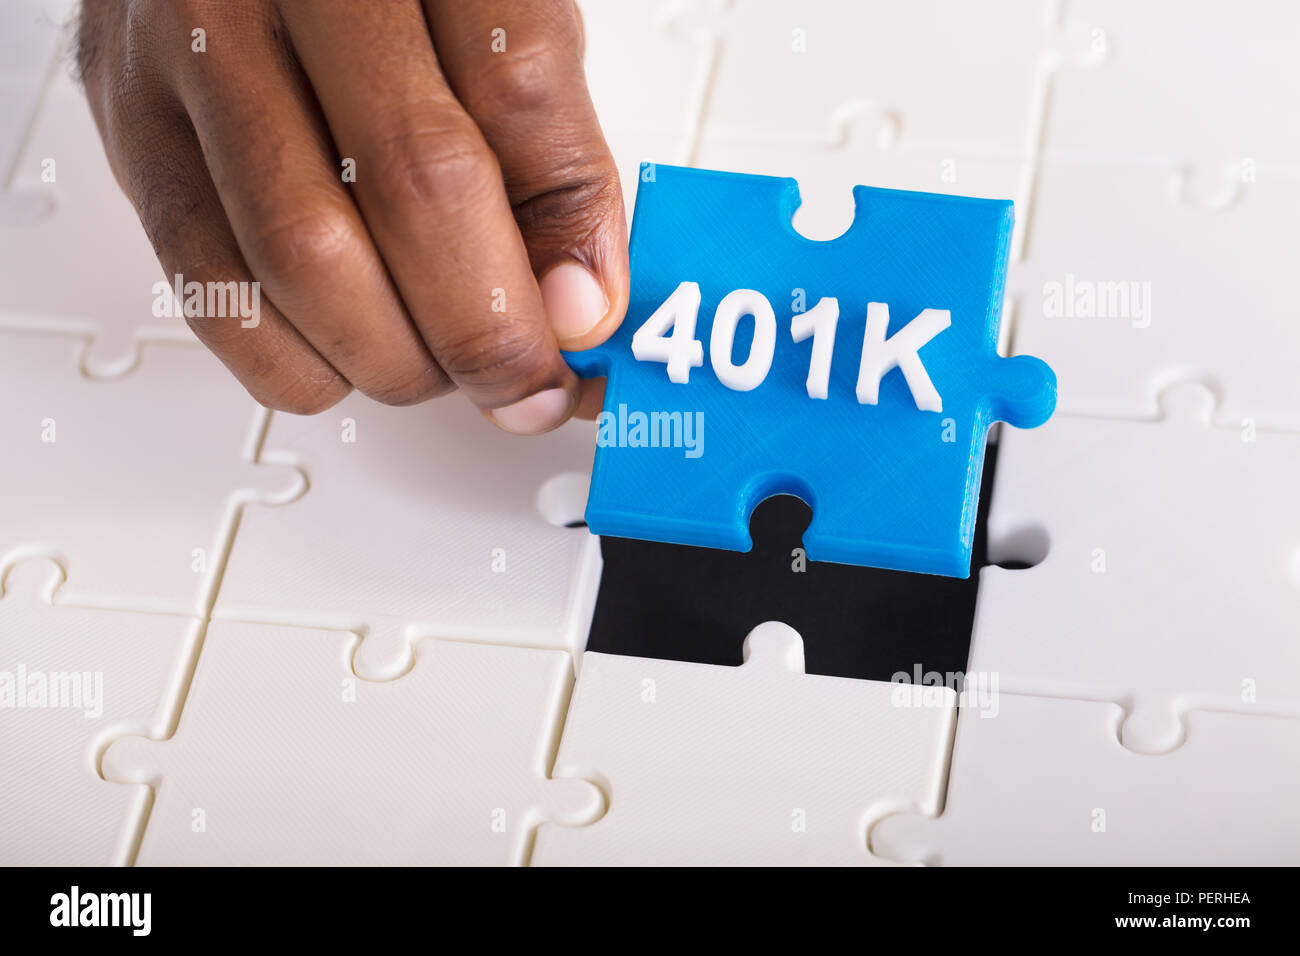 Overhead View Of A Person's Hand Holding 401k Blue Jigsaw Puzzle Stock Photo